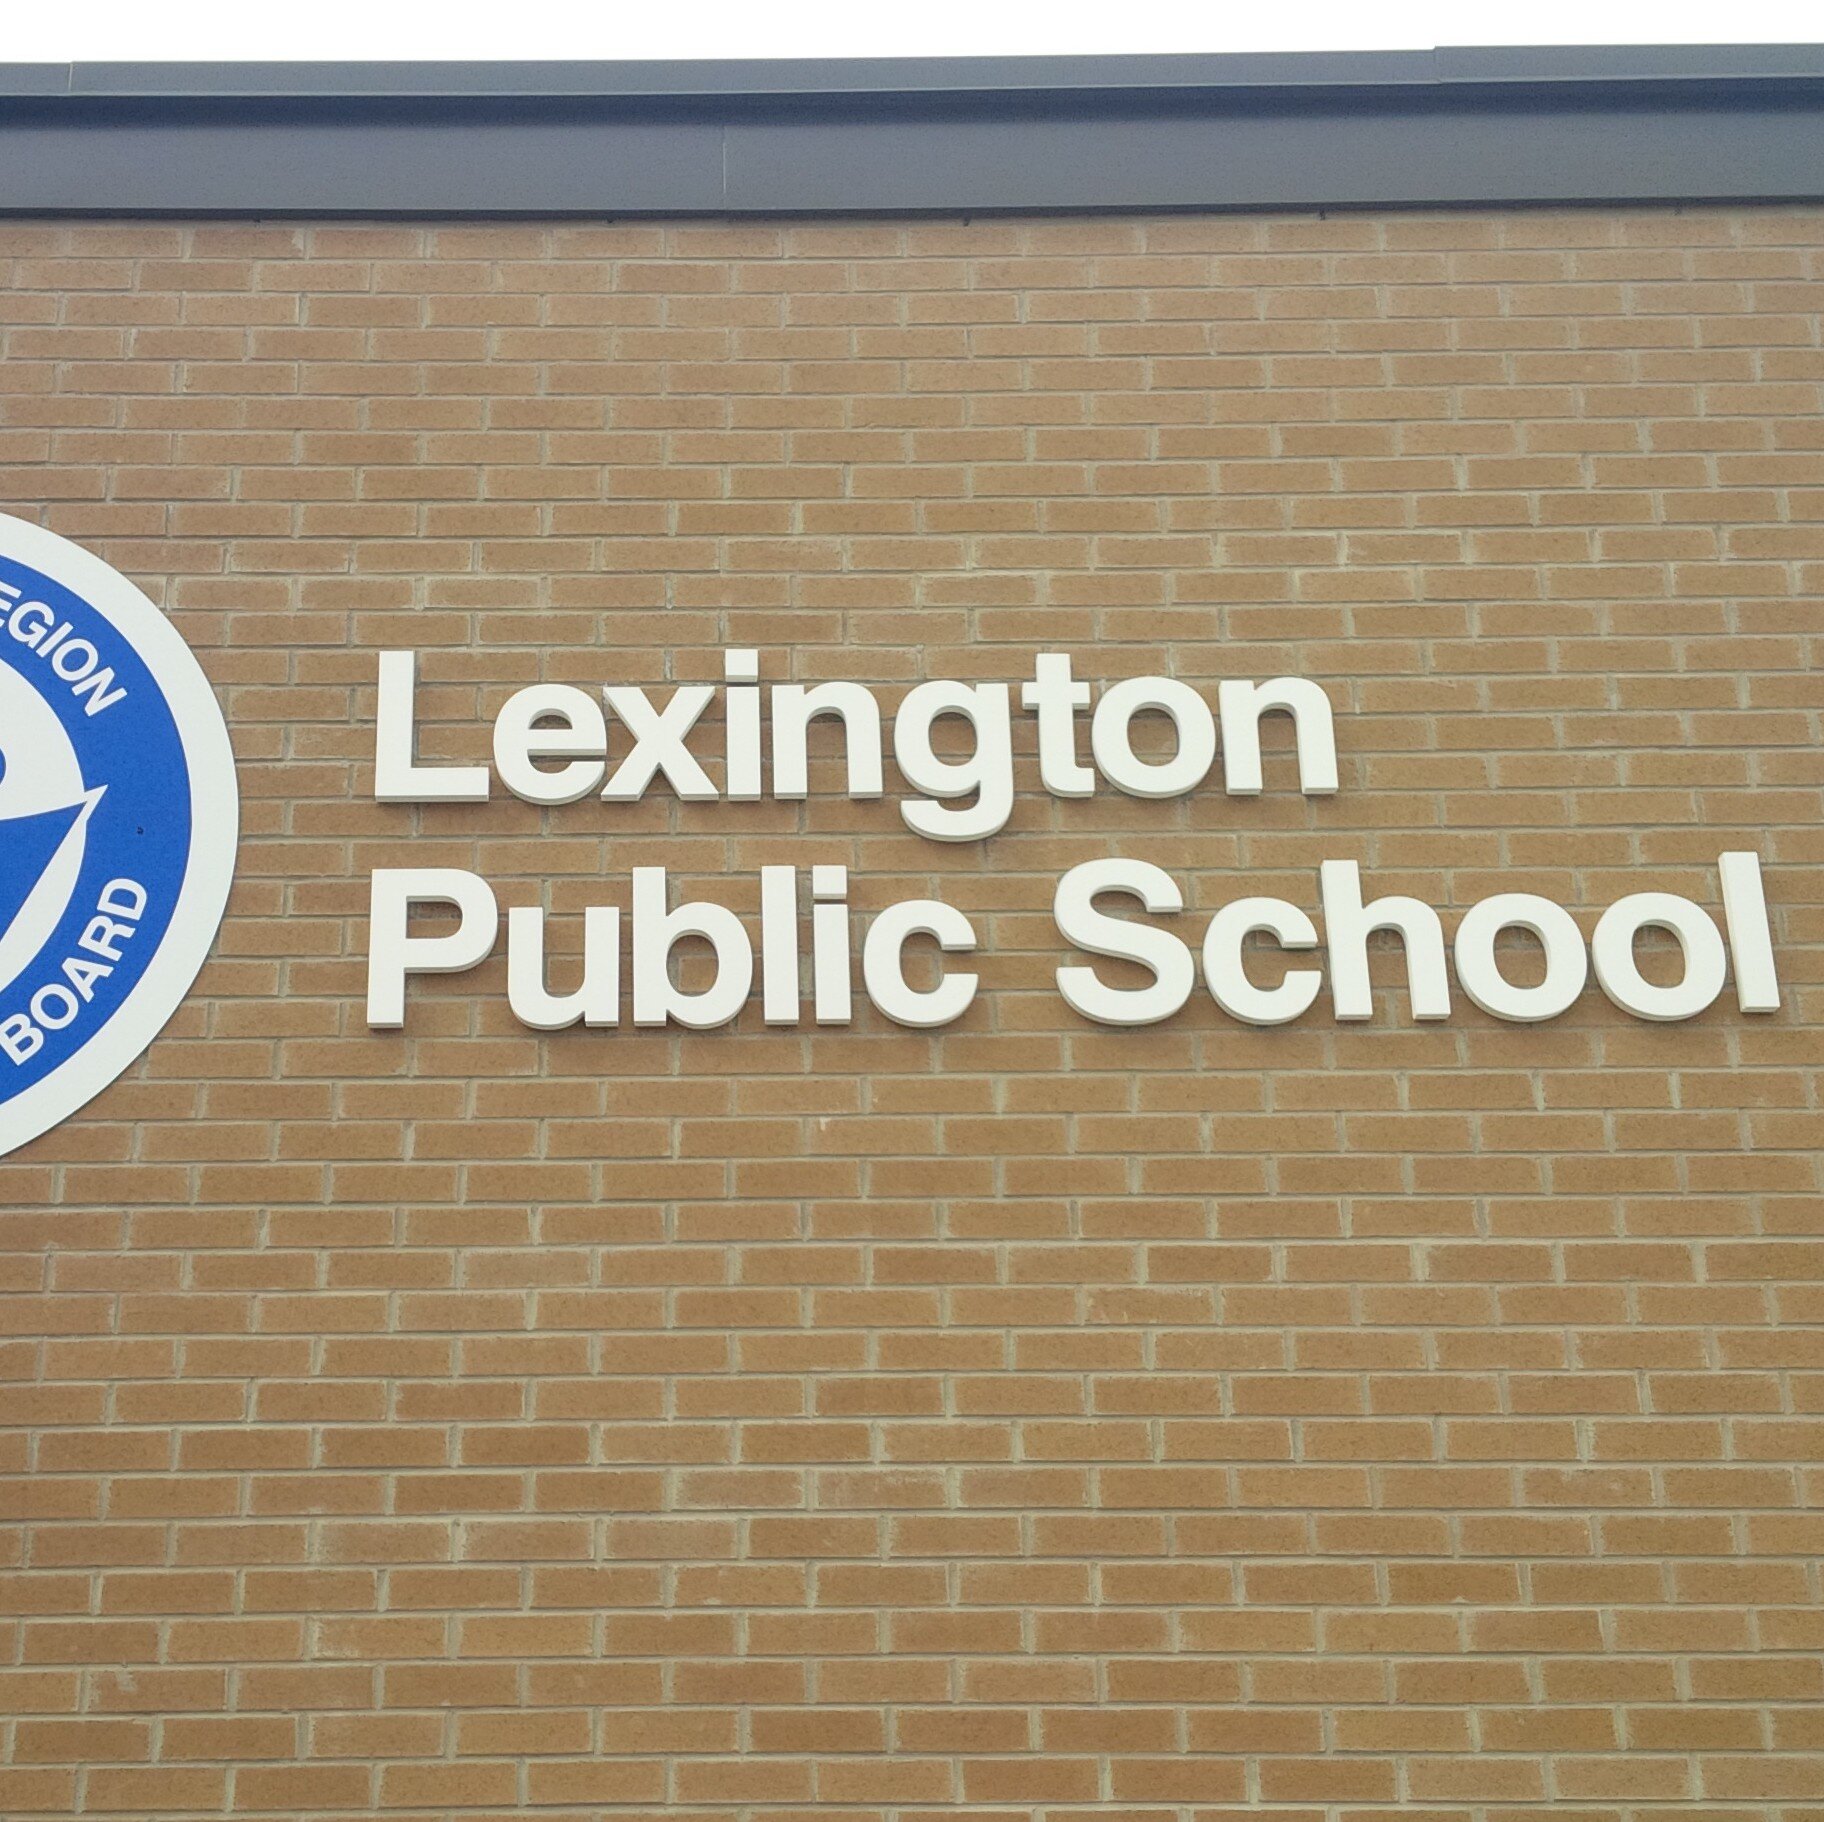 Lexington PS official Twitter feed. We are a small community school with a big heart and big ambitions.